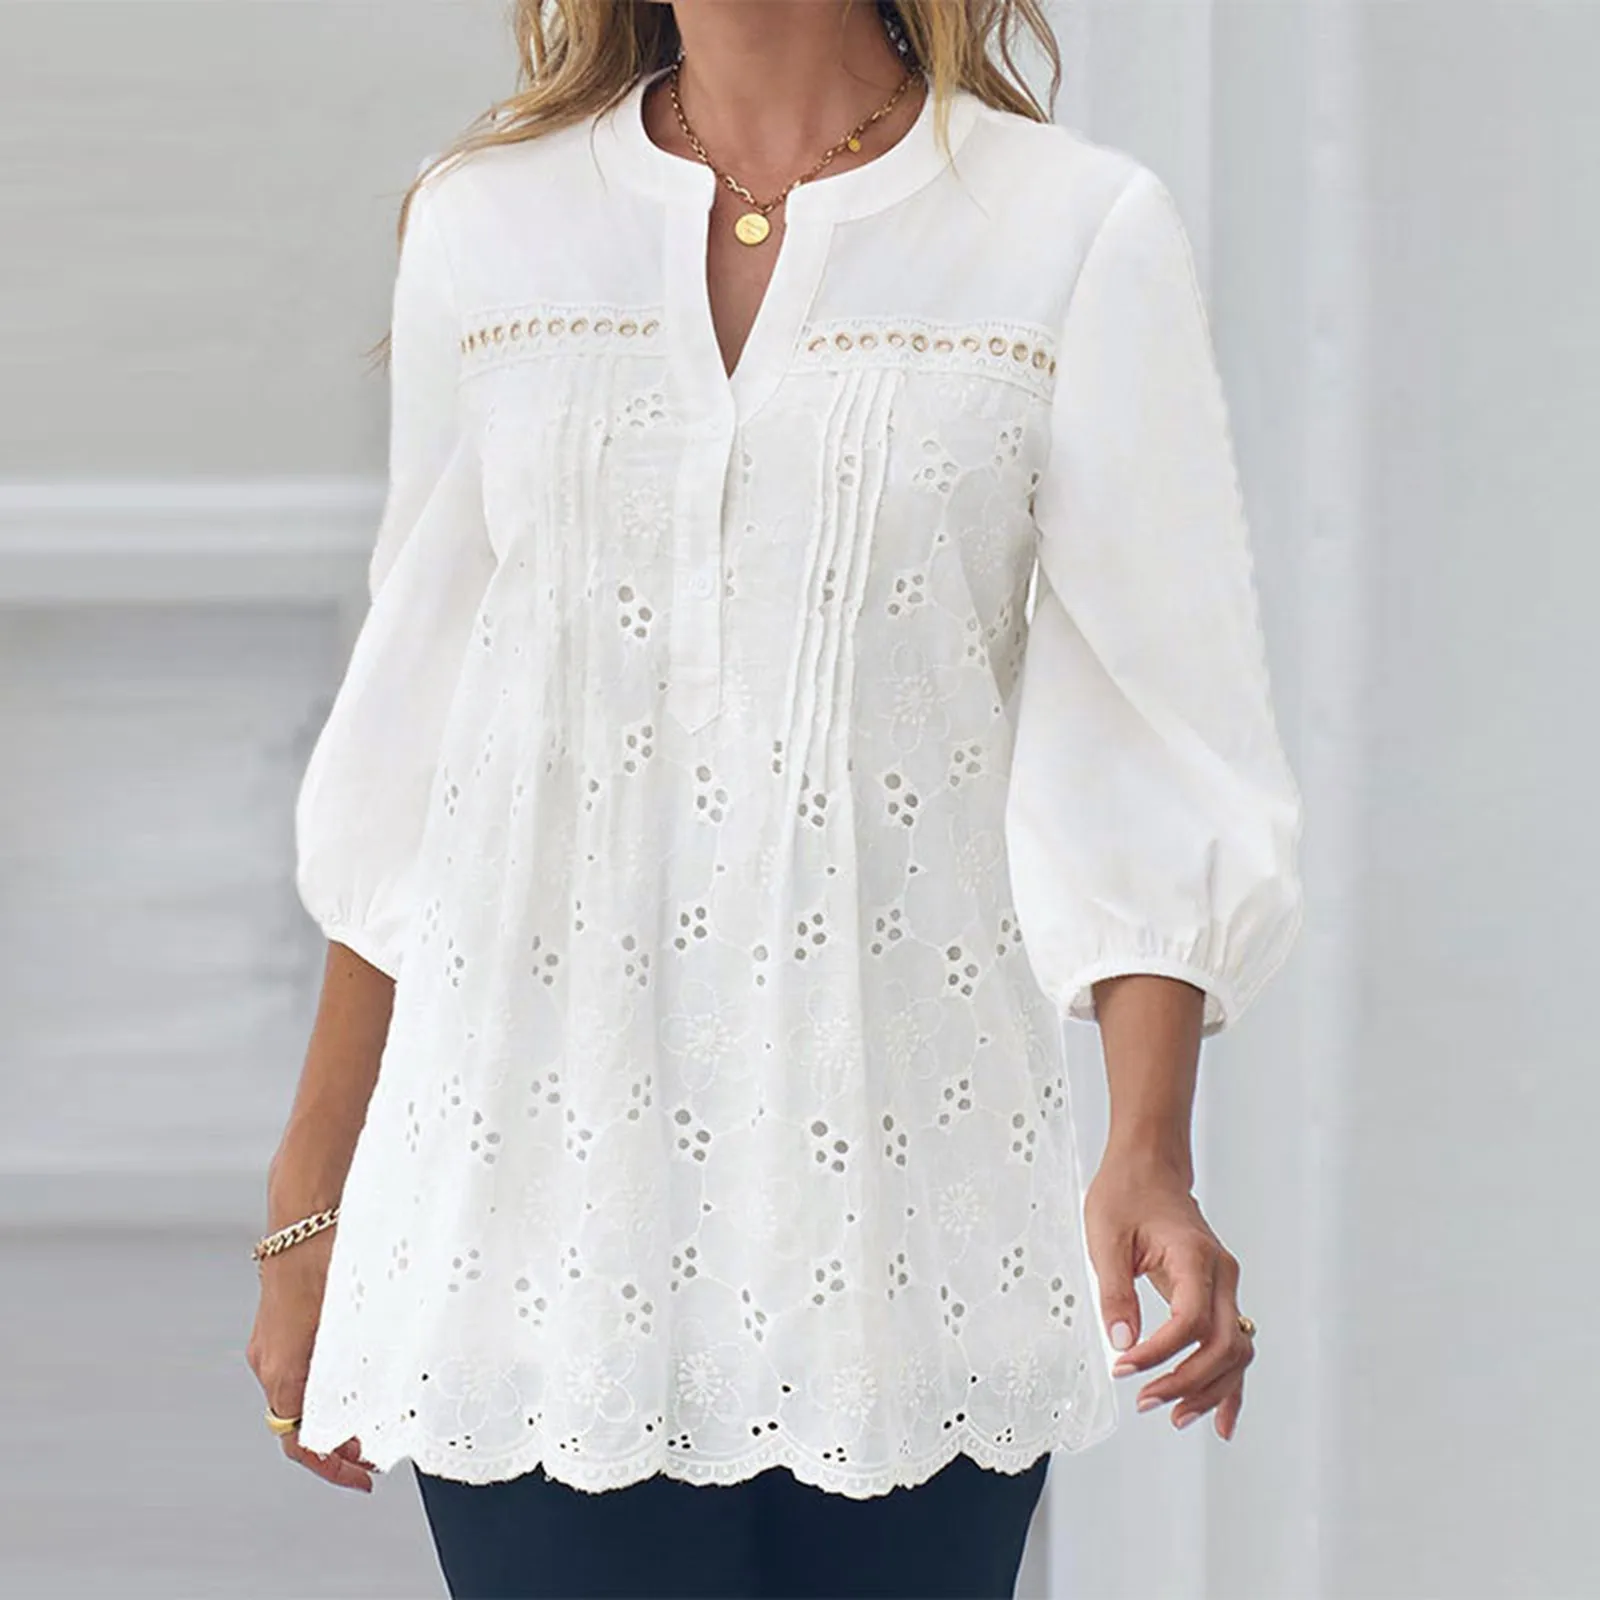 

Chic Hollow-out V Neck Lace Blouse Floral Patterns Embroidery Lady Office White Shirts Casual Women Shirt Puff Sleeve Cotton Top